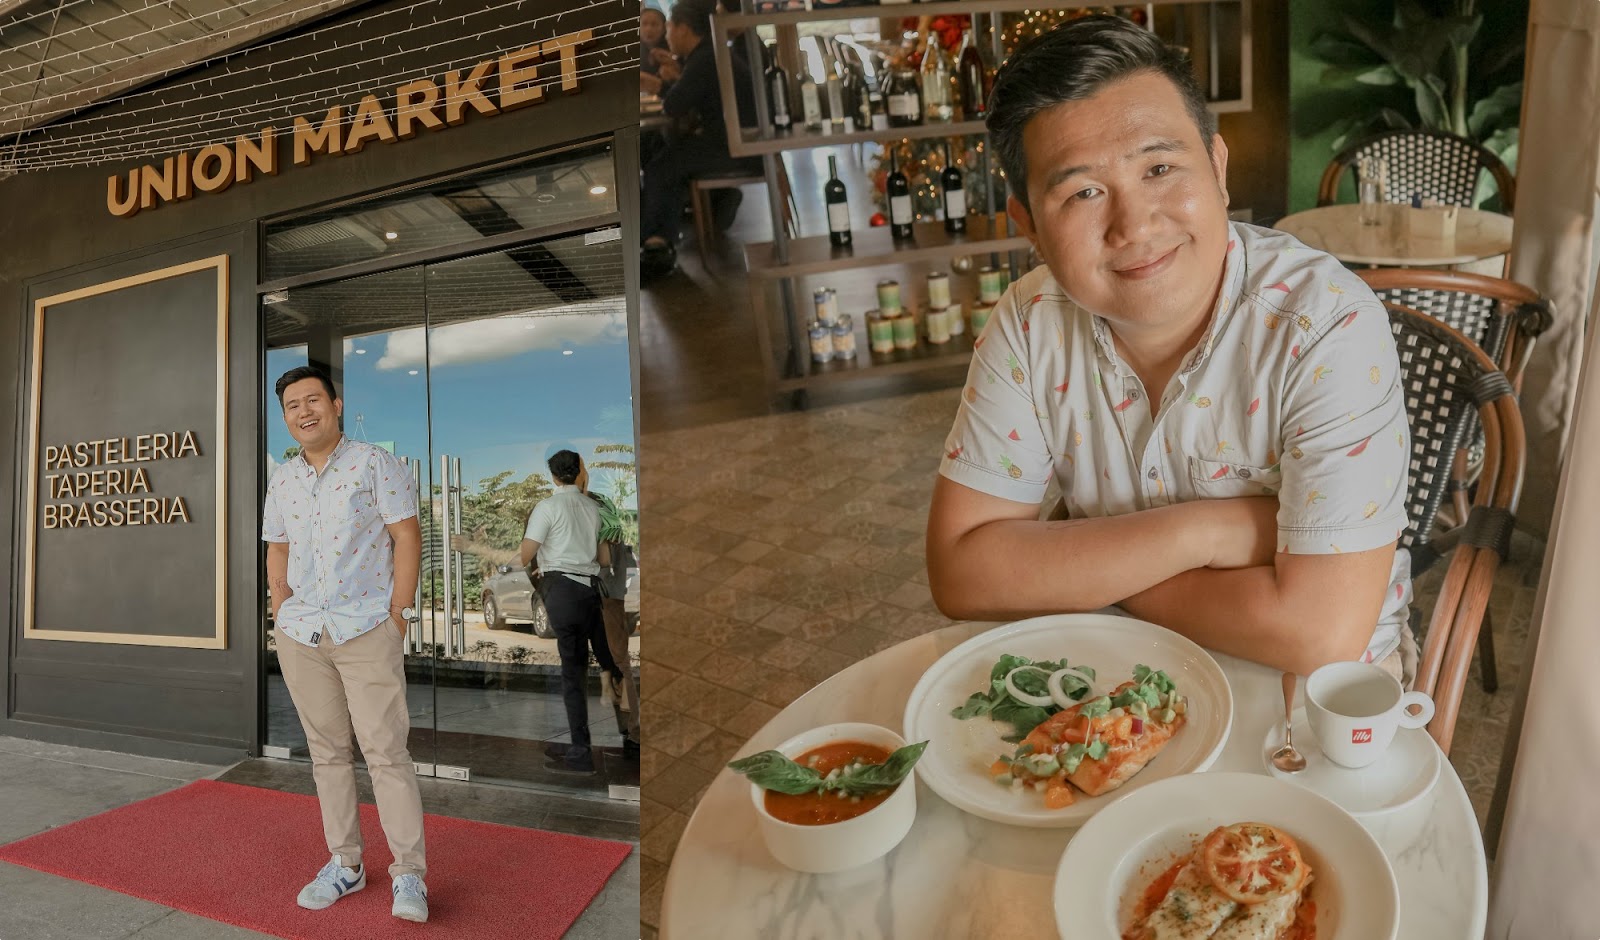 A world of wonderful flavors at Union Market